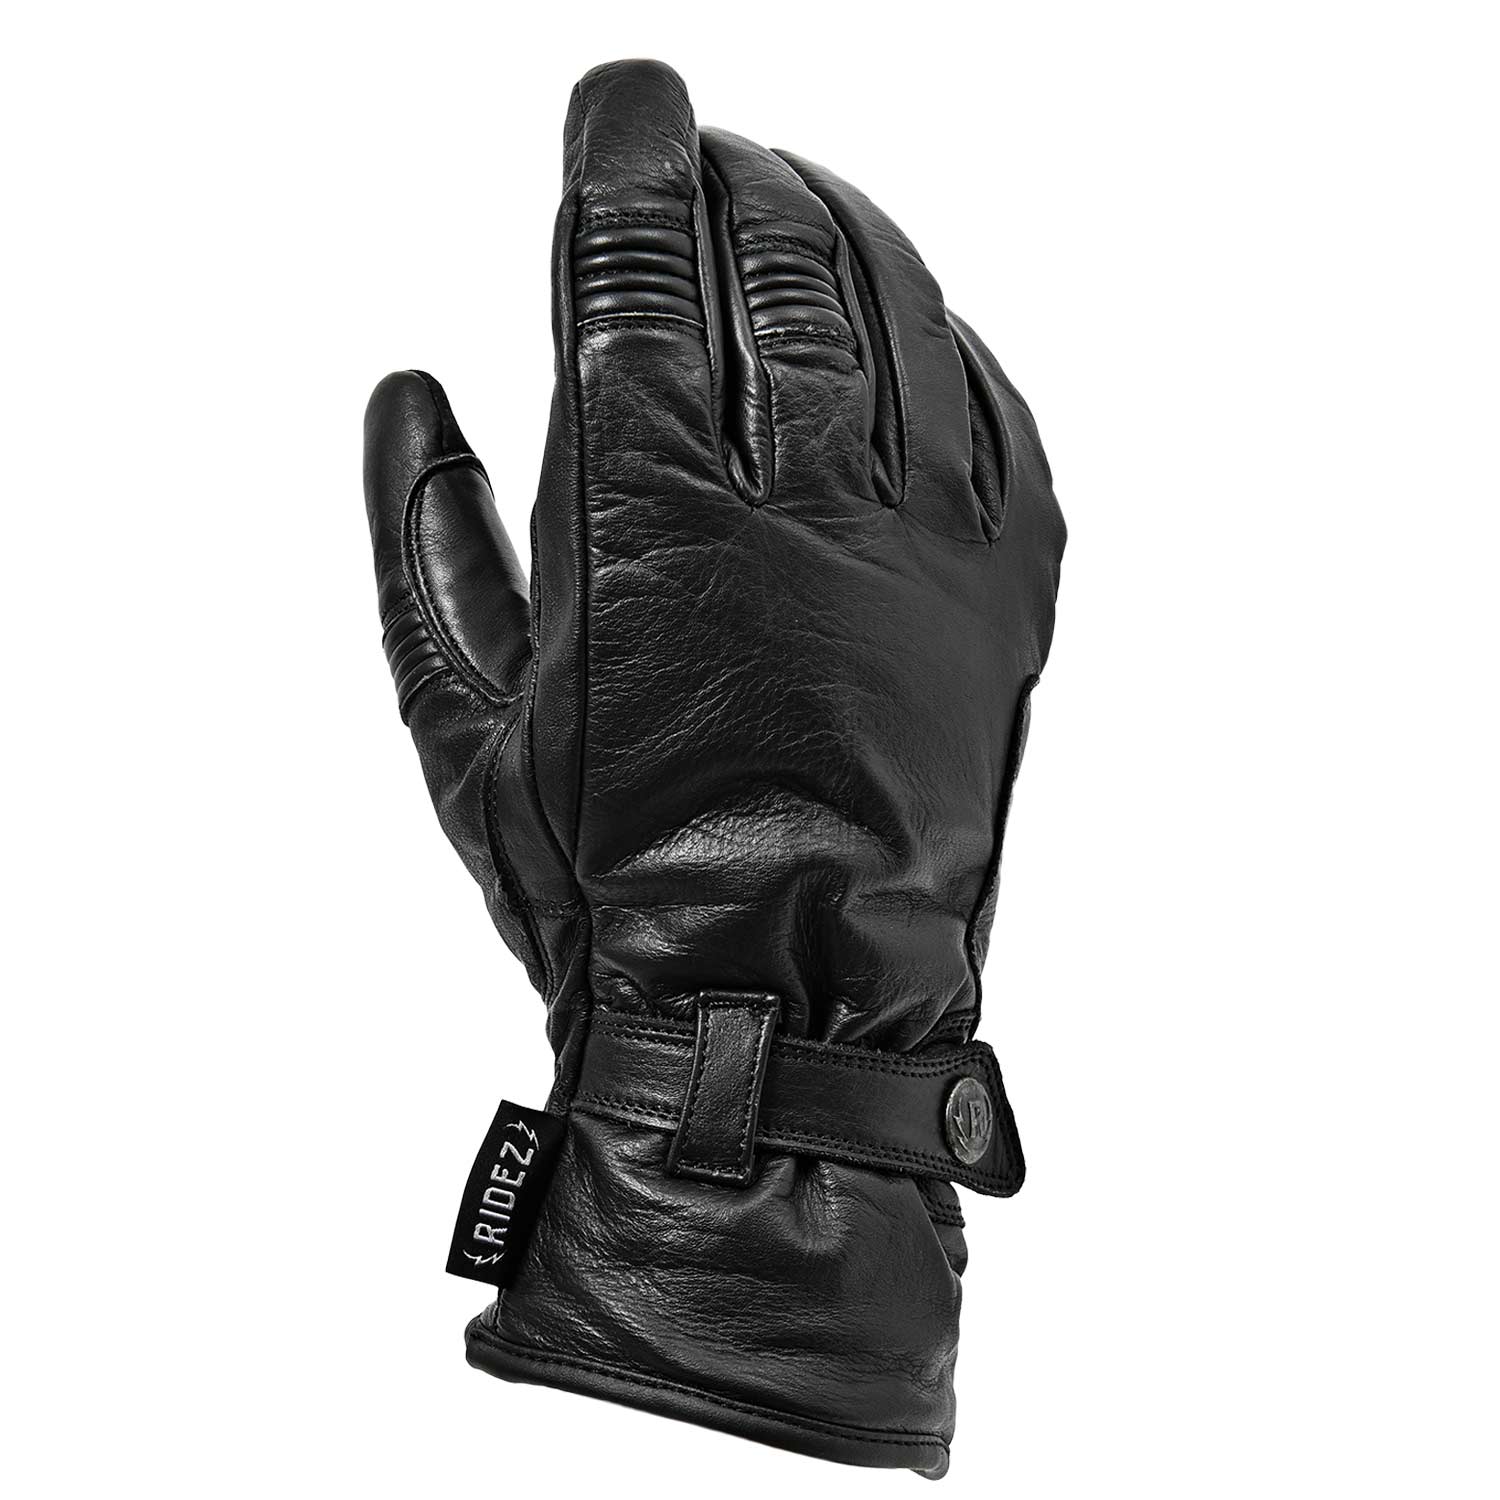 RIDEZ MELD GLOVES Cold Protection Motorcycle Leather Gloves BLACK RWG06